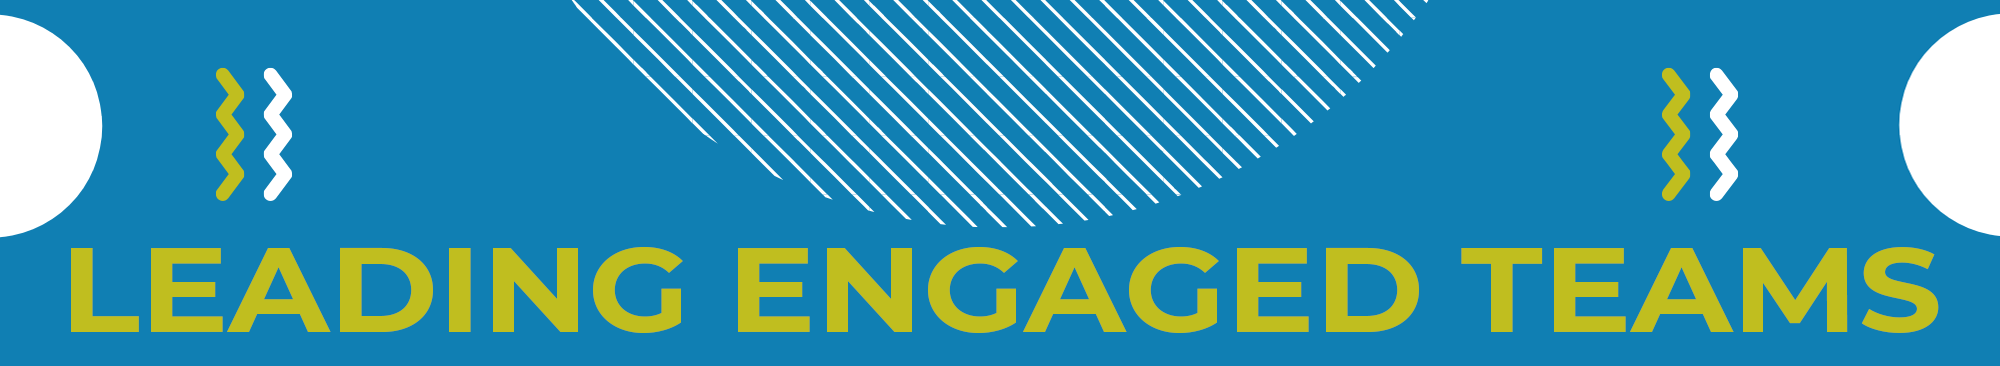 Leading Engaged Teams title banner